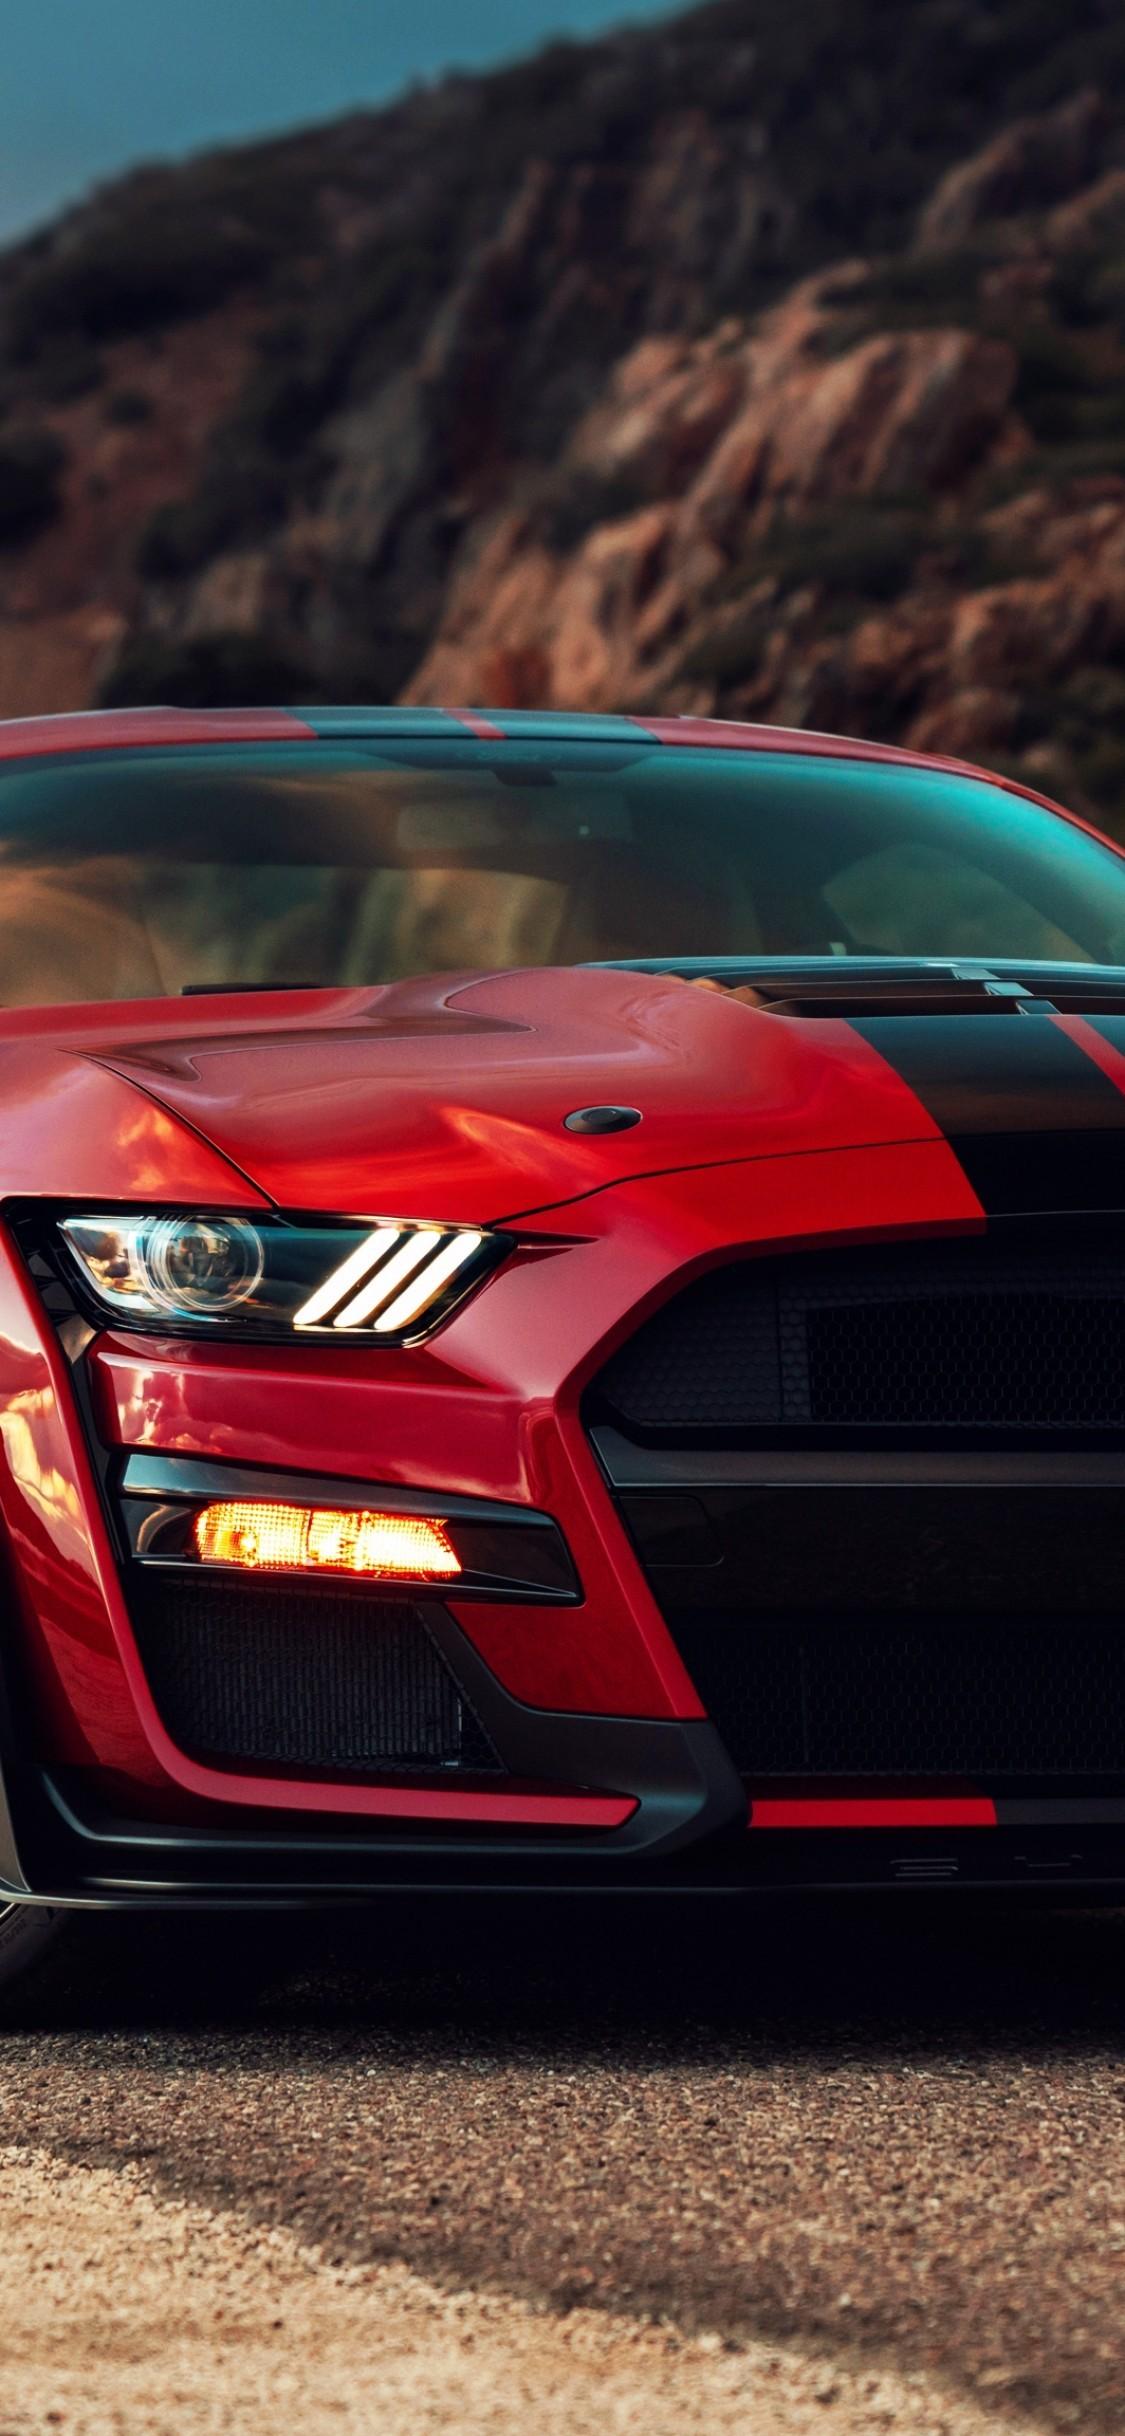 Download 1125x2436 Ford Mustang Shelby Gt500 2020, Red And Black